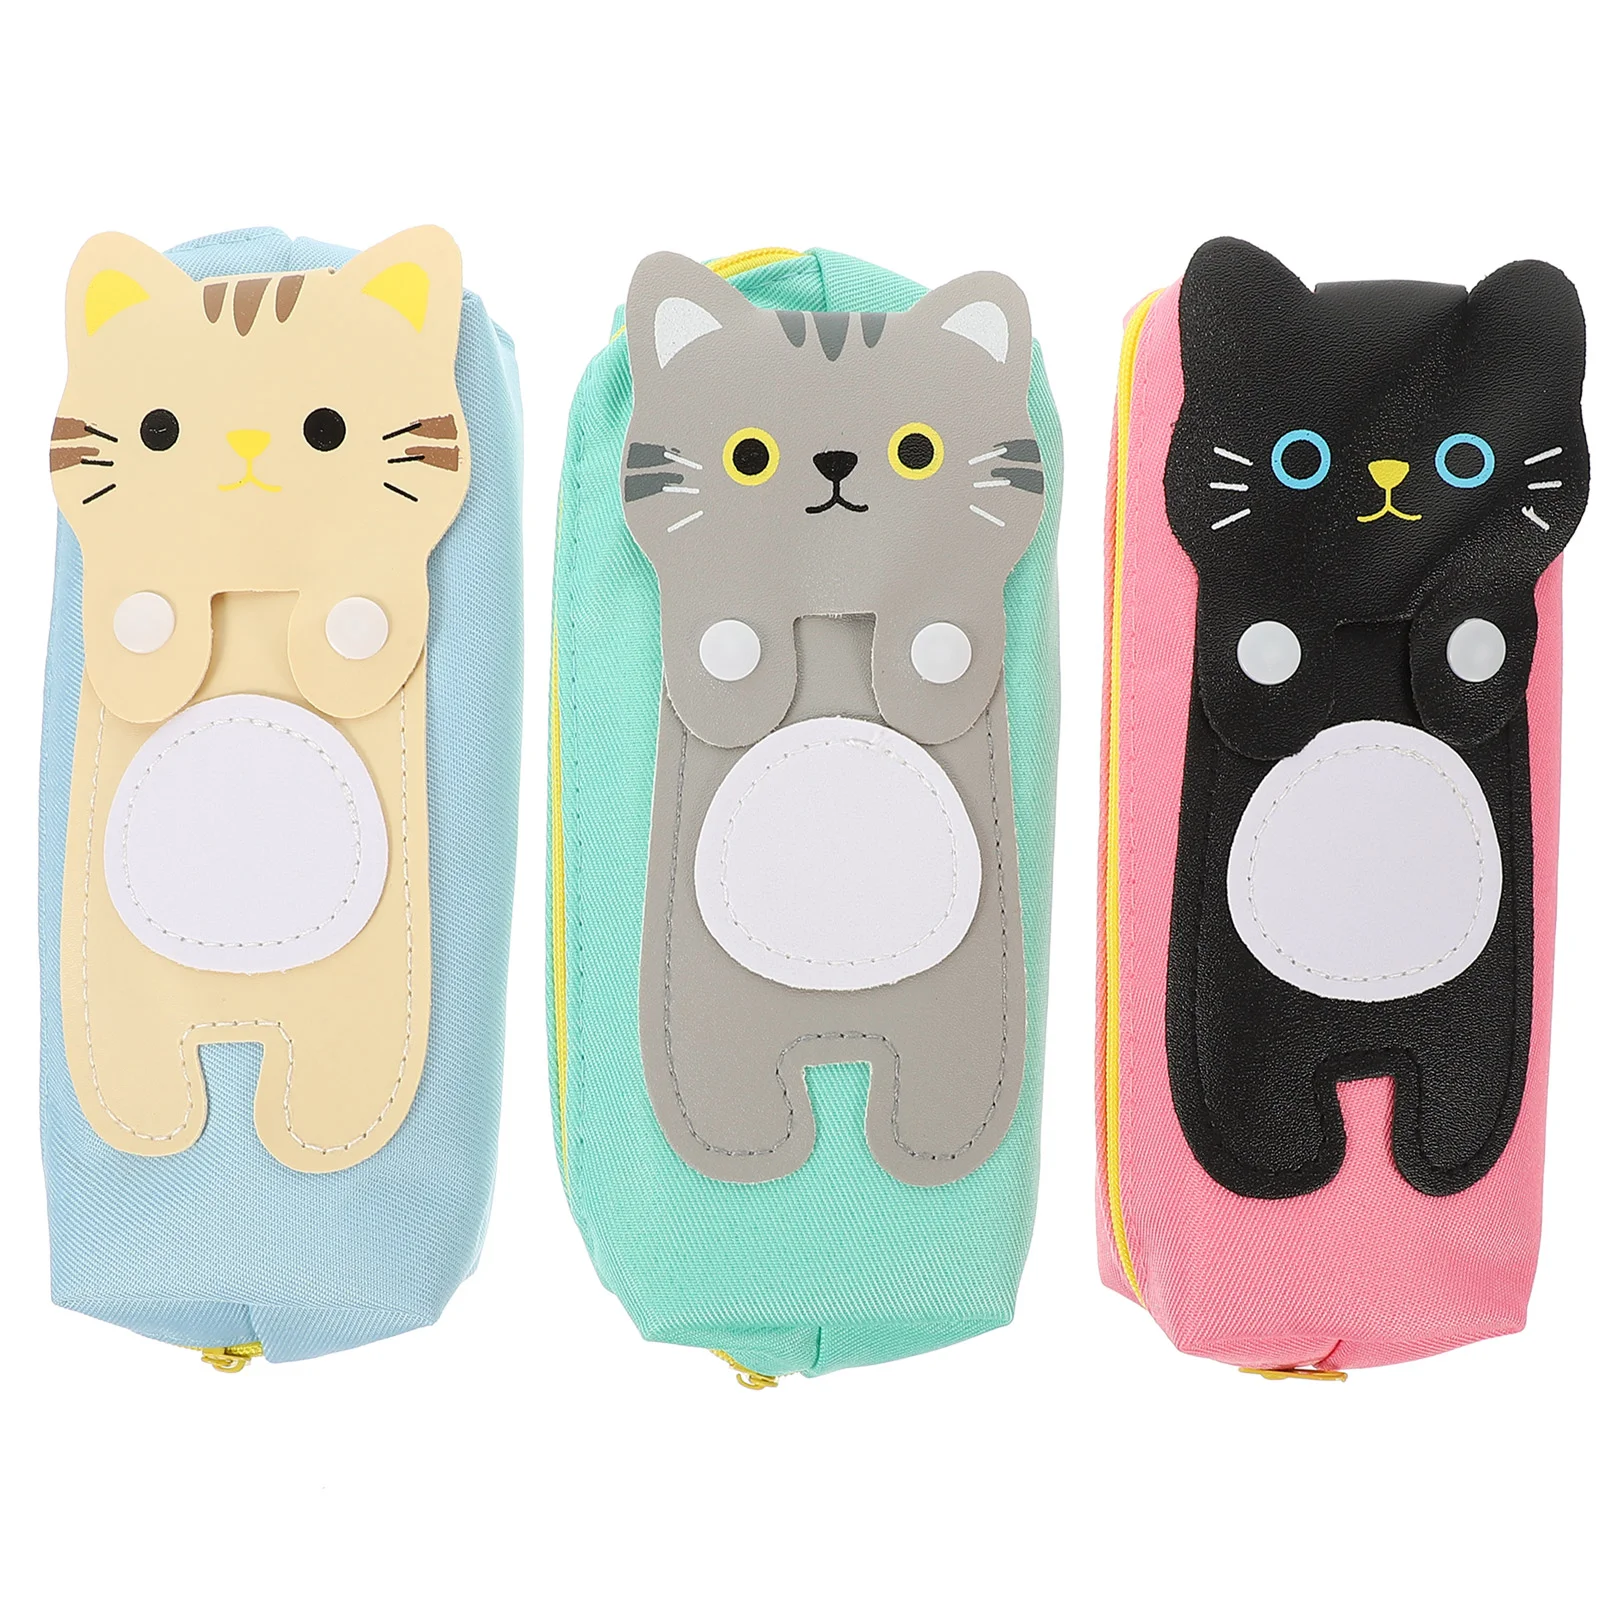 3 Pcs Cartoon Cat Pencil Bag Pencils Case Pouch for Office Cute Pattern Student 56 pieces girl hair clips cute animals pattern hair accessories flower pattern hair clip rainbow hairpin for girl